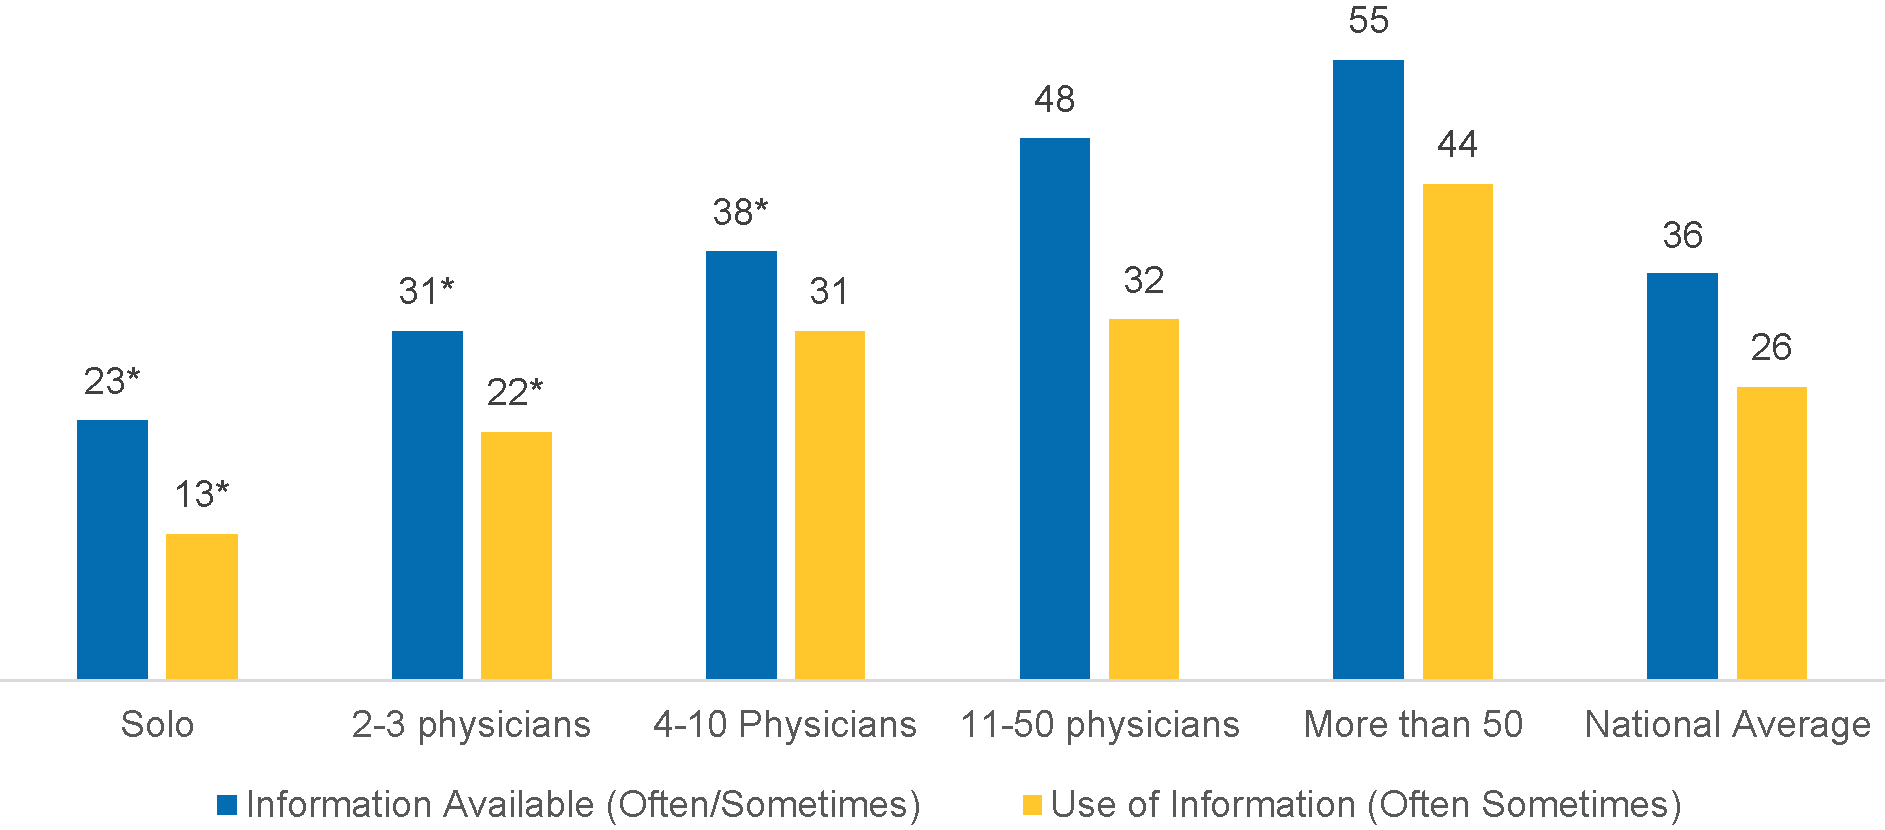 Figure 4. Grouped bar graphs organized by practice size showing the percent of physicians who reported information available (often/sometimes) vs. use of information (often/sometimes). Solo: 23% vs 13%. 2-3 Physicians: 31% vs. 22%. 4-10 Physicians: 38%-31%. 11-50 Physicians: 48% vs. 32%. >50 Physicians: 55% vs. 44%. National Average: 36% vs. 26%.